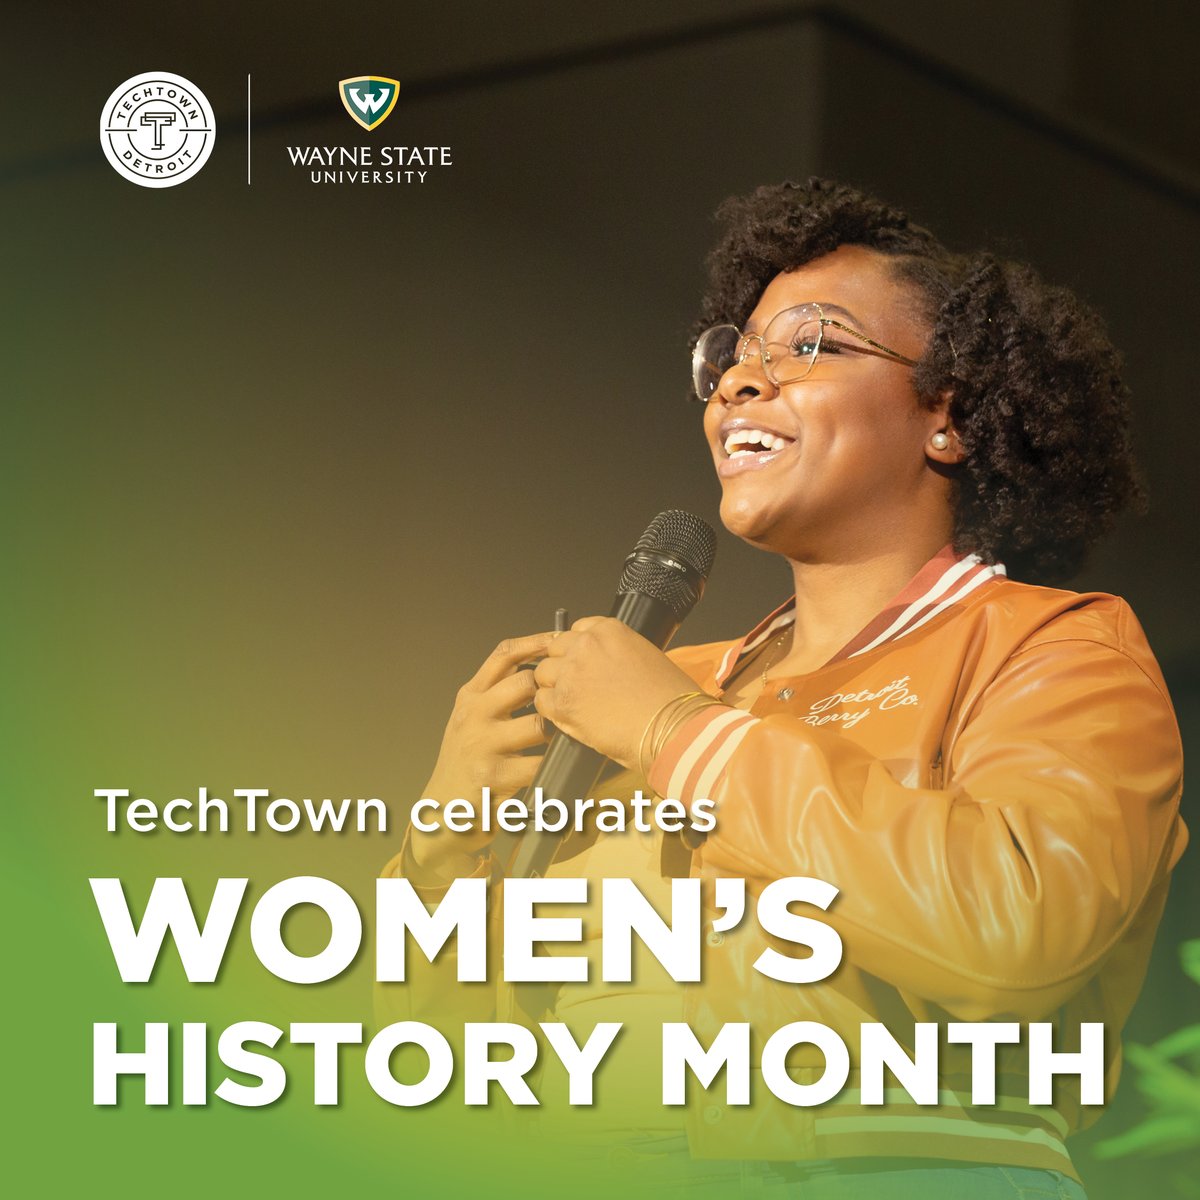 Happy #WomensHistoryMonth! ✨ From our program alumni, building members and tenants to the team members who make up our staff, TechTown celebrates the contributions and successes of the incredible women and non-binary people who help shape our vibrant community. 👏